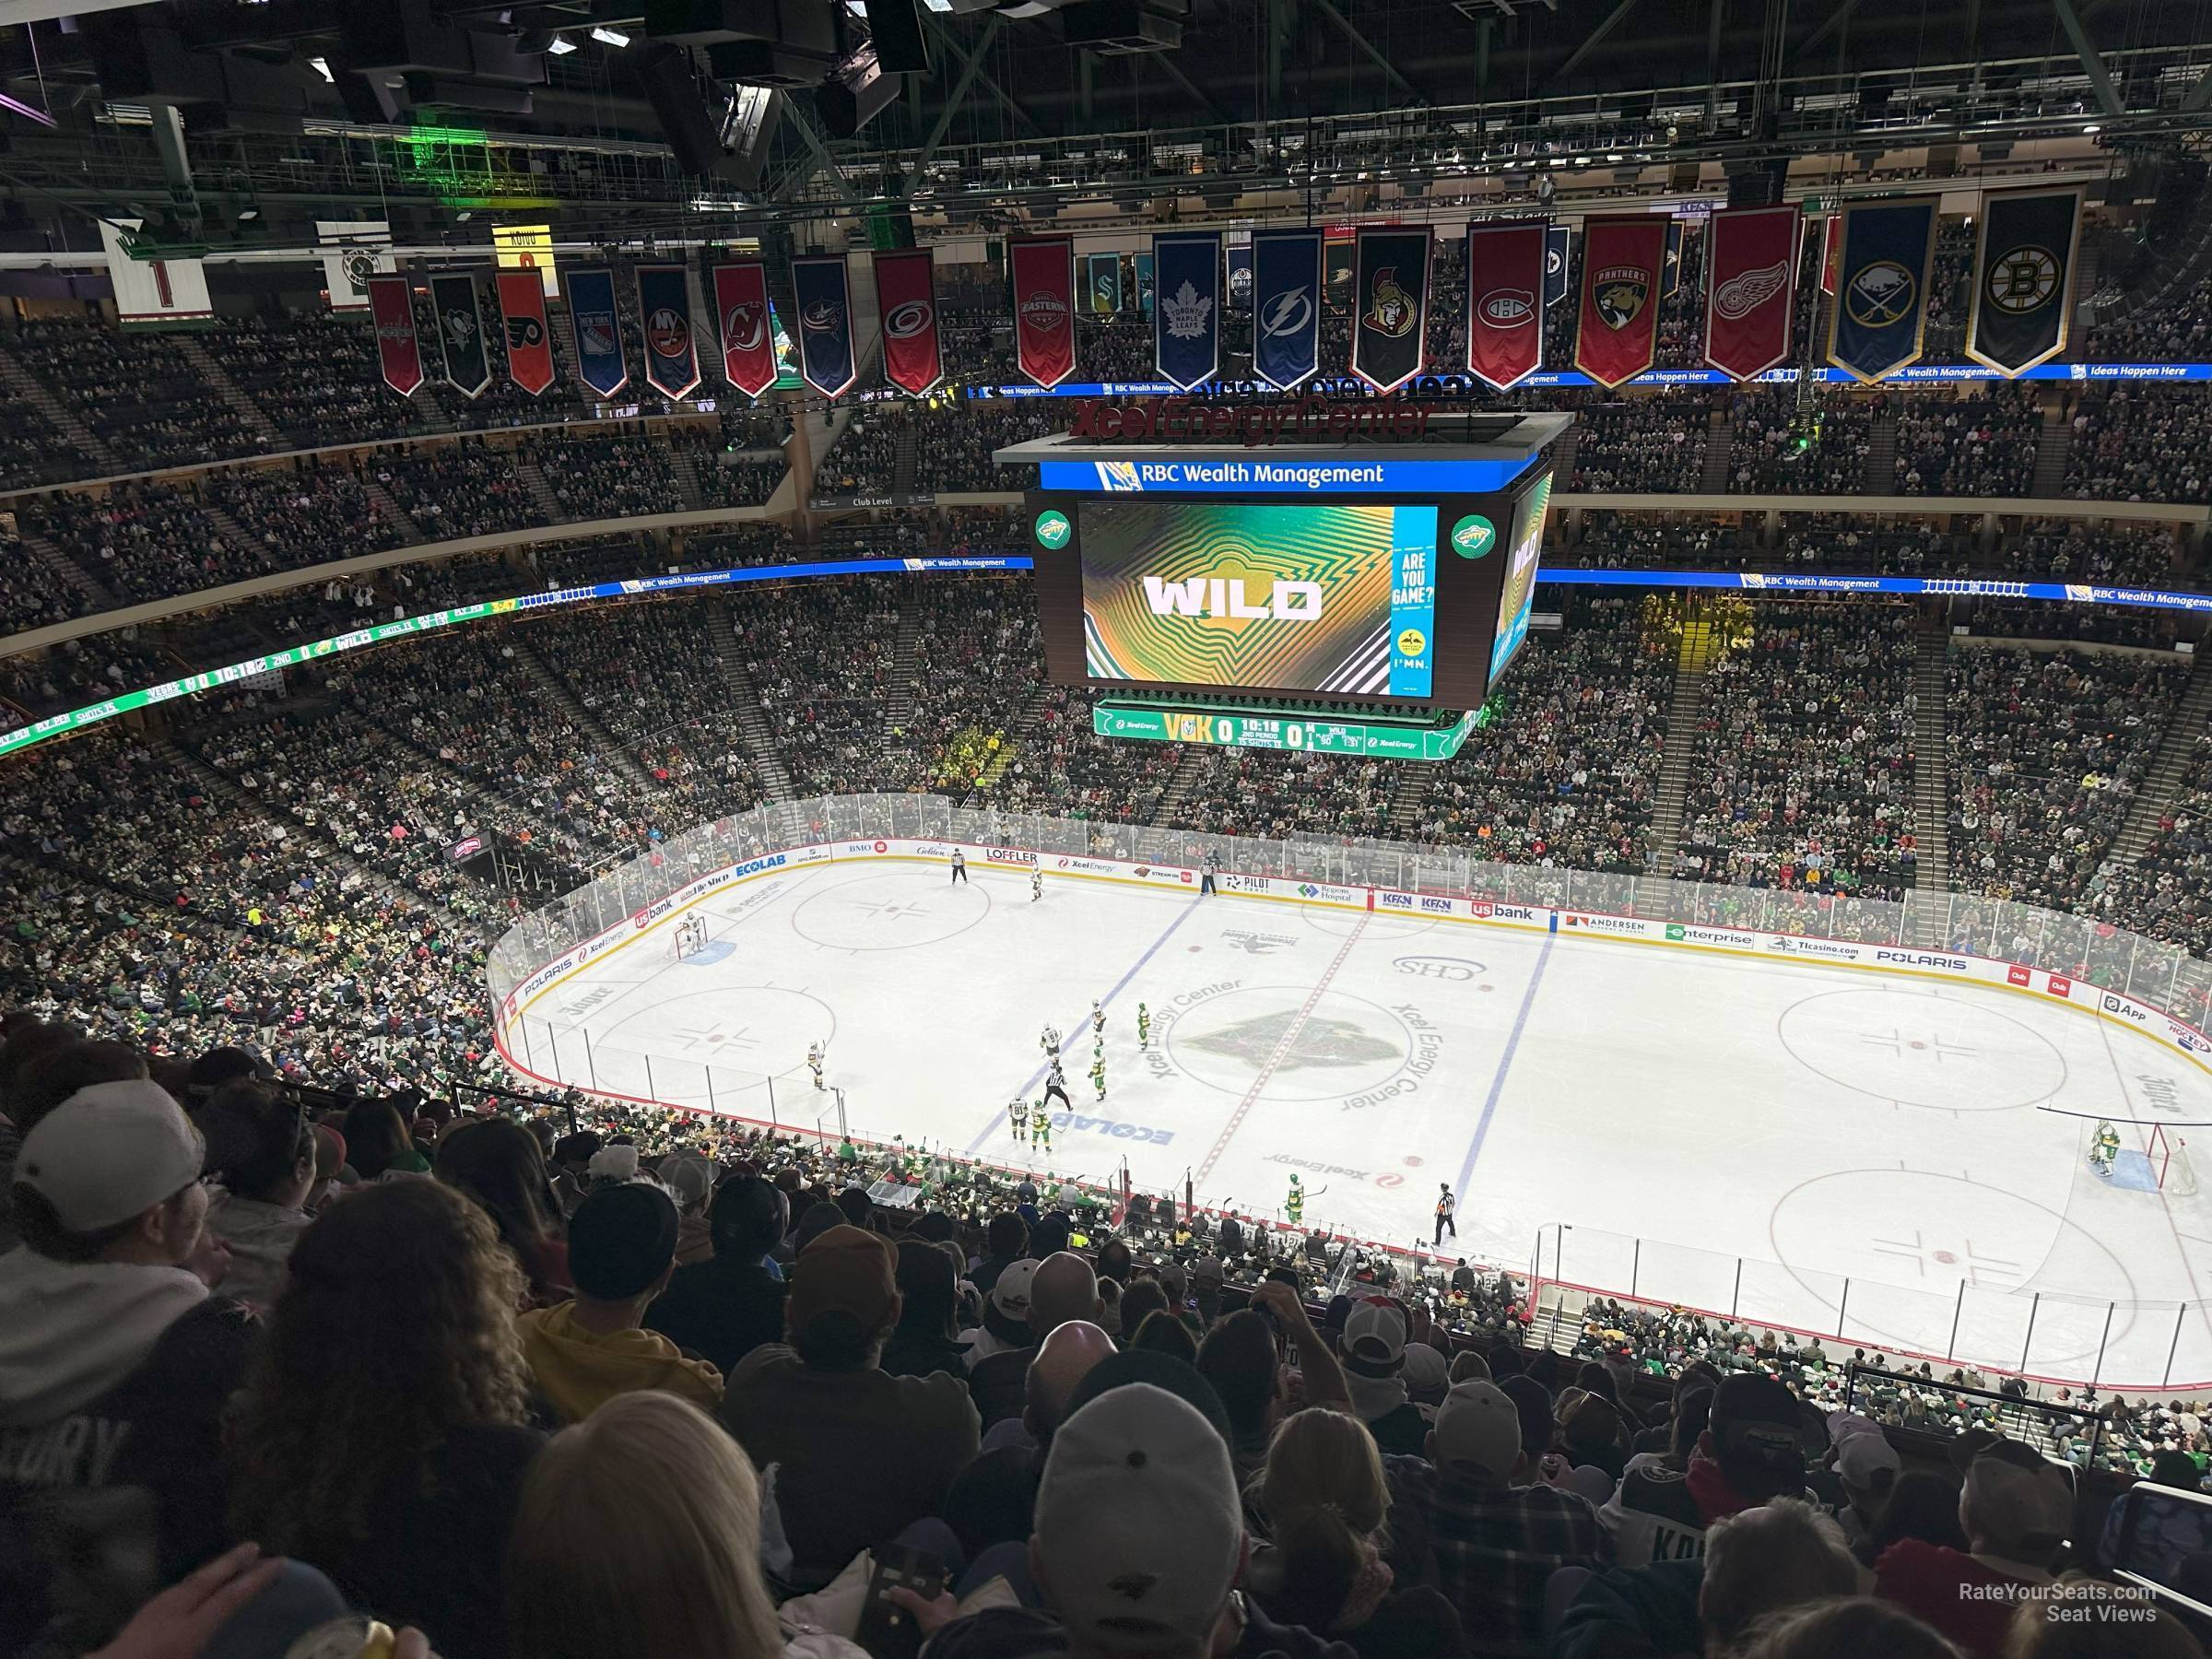 section 218, row 11 seat view  for hockey - xcel energy center